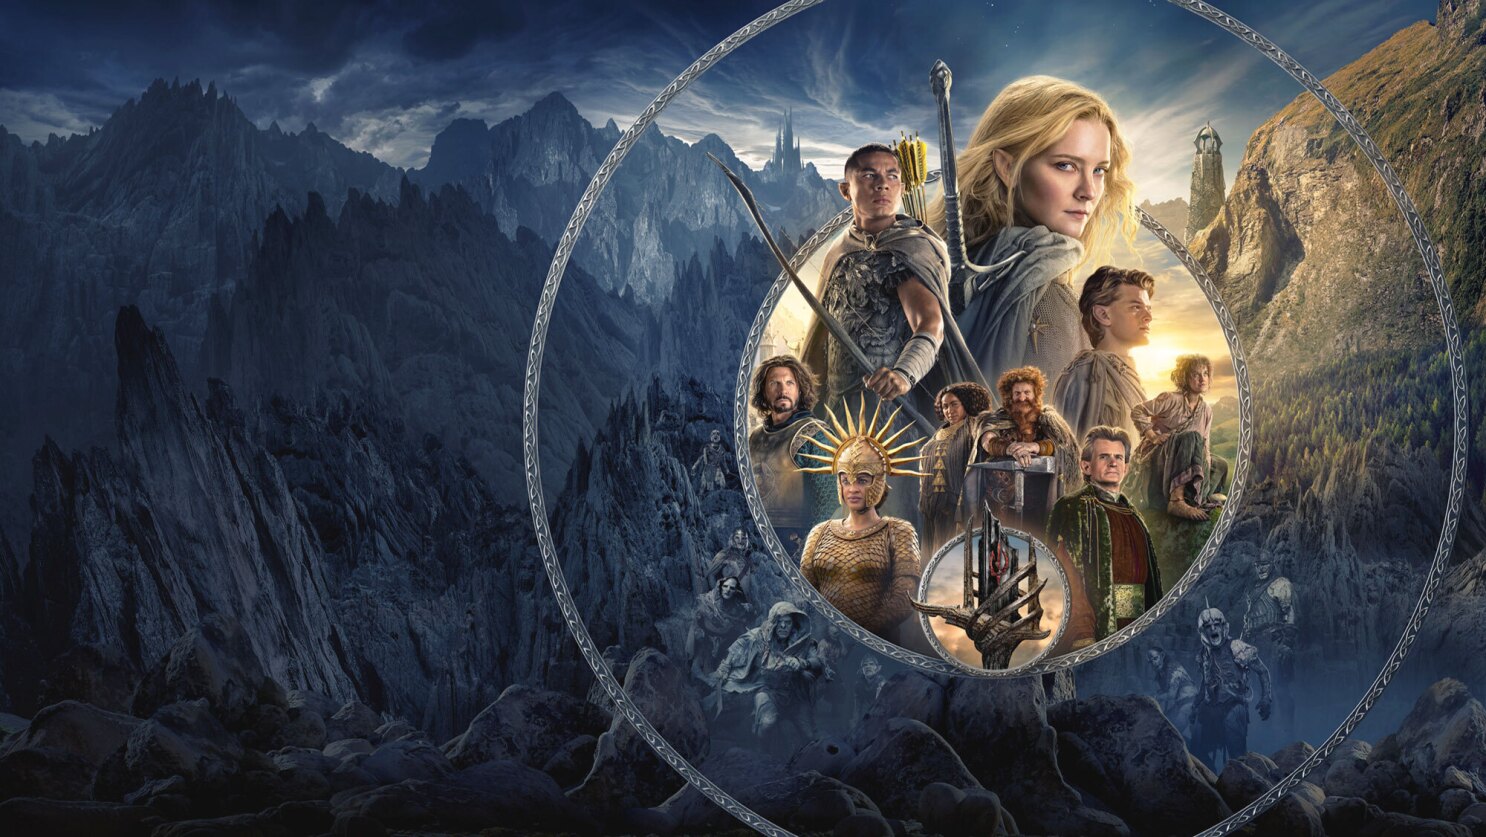 Tom Bombadil To Make Live-Action Debut In ‘Lord of the Rings: Rings Of Power’ Season 2